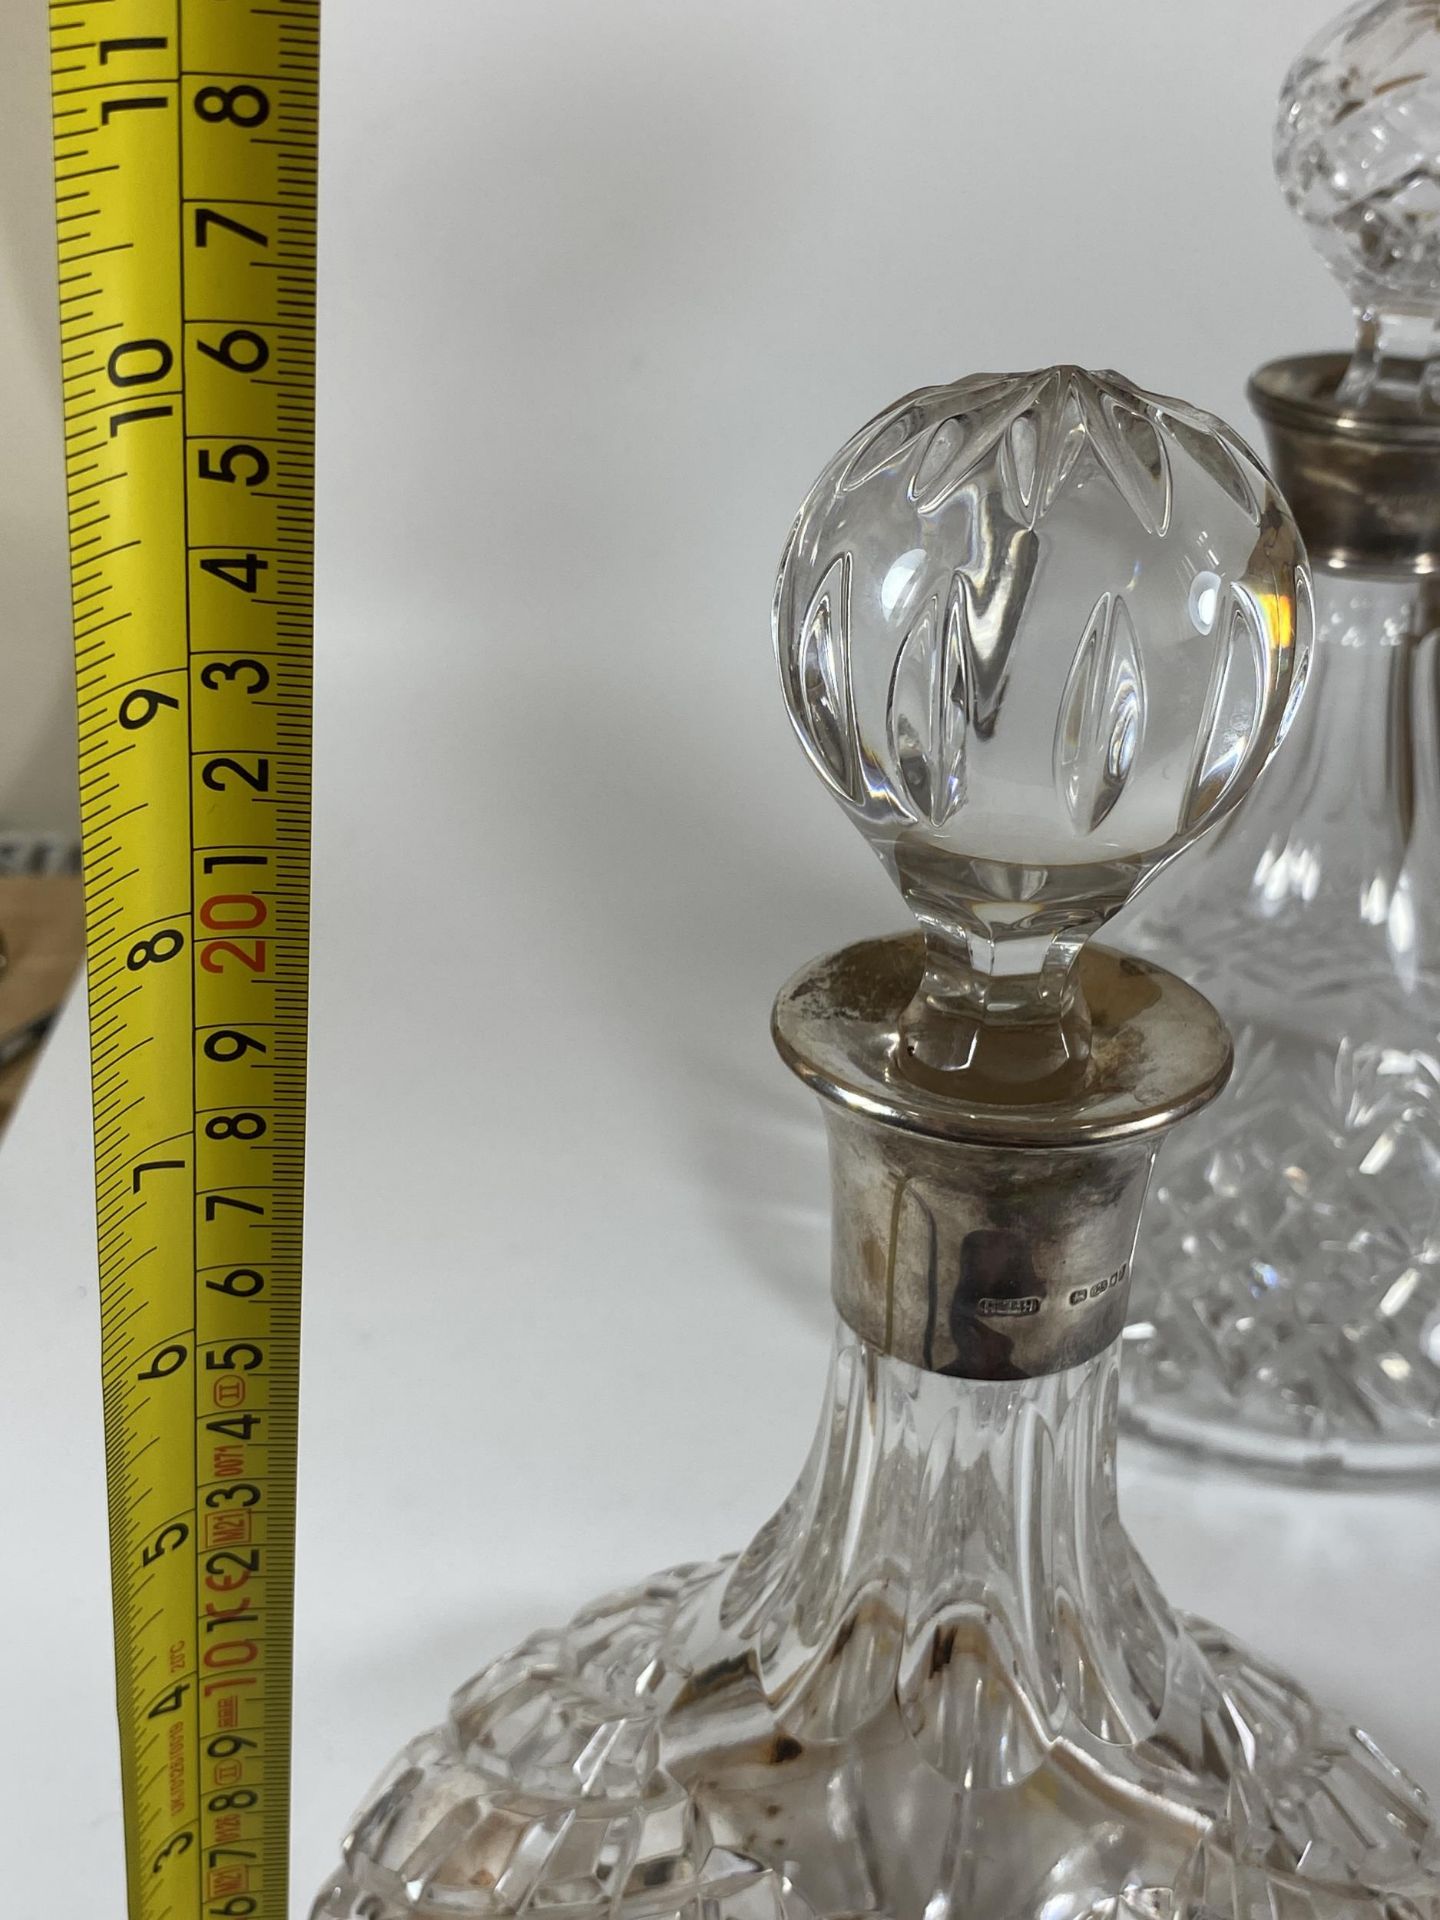 A CUT GLASS SHIPS DECANTER WITH HALLMARKED SILVER COLLAR, HALLMARKS FOR LONDON, 2002, MAKERS - Image 3 of 3